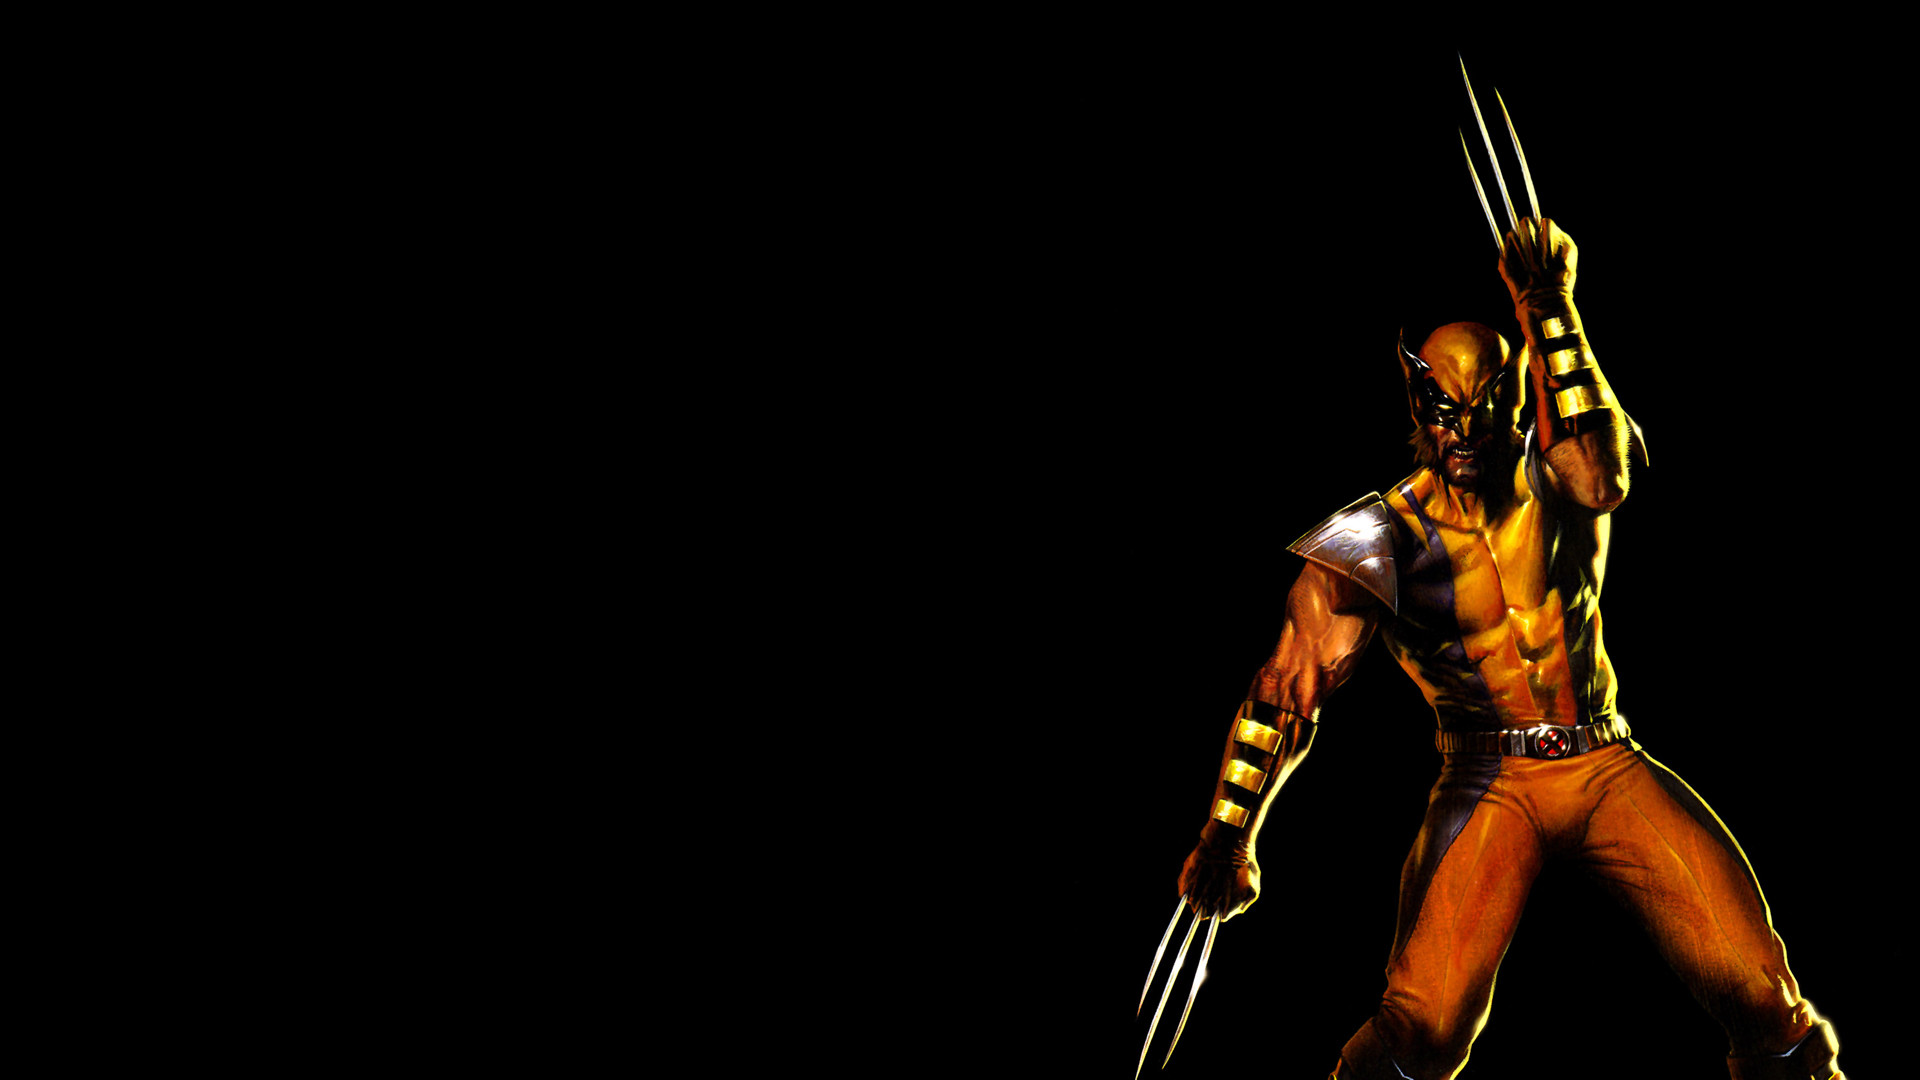 1920x1080 wolverine with claws out